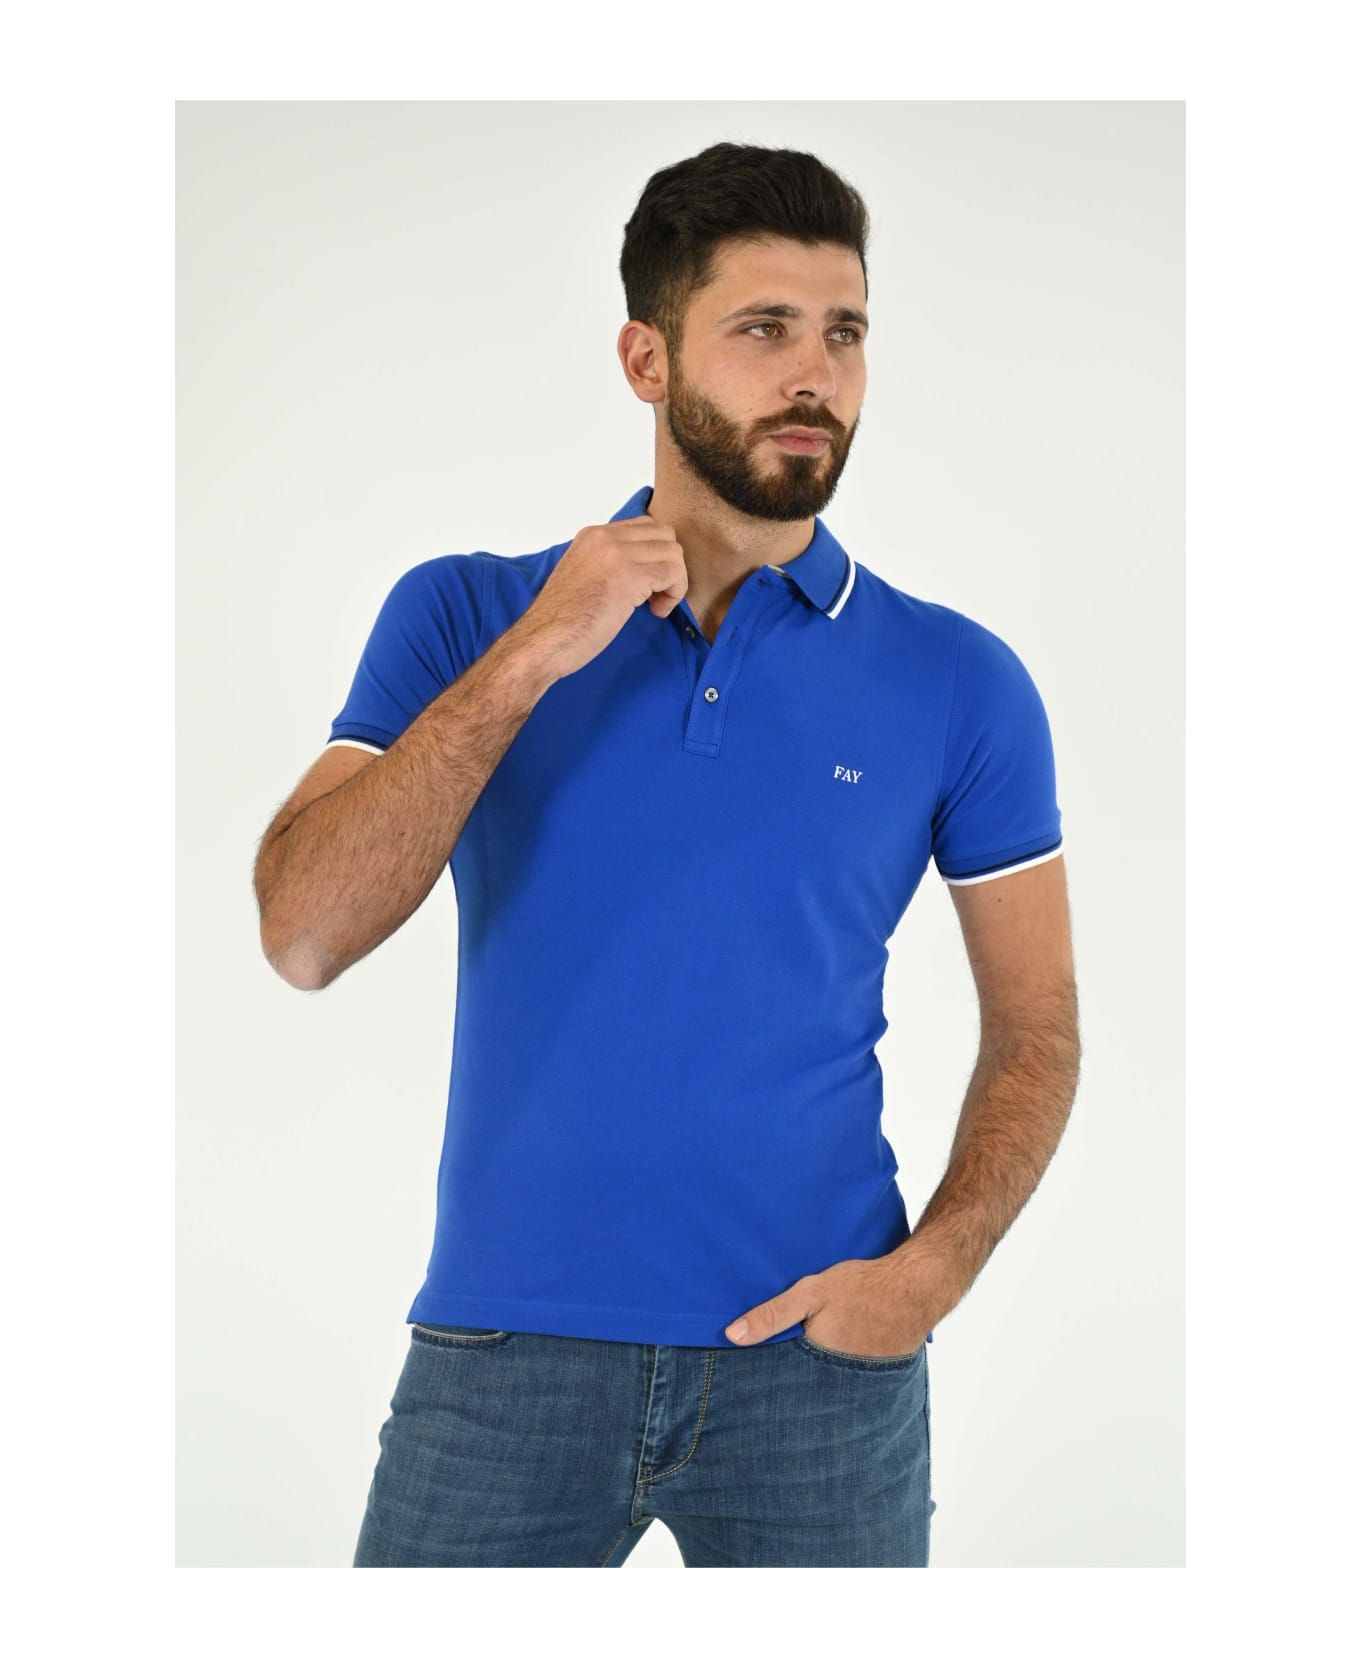 Fay Polo Shirt In Blue Cotton - BLUE ポロシャツ